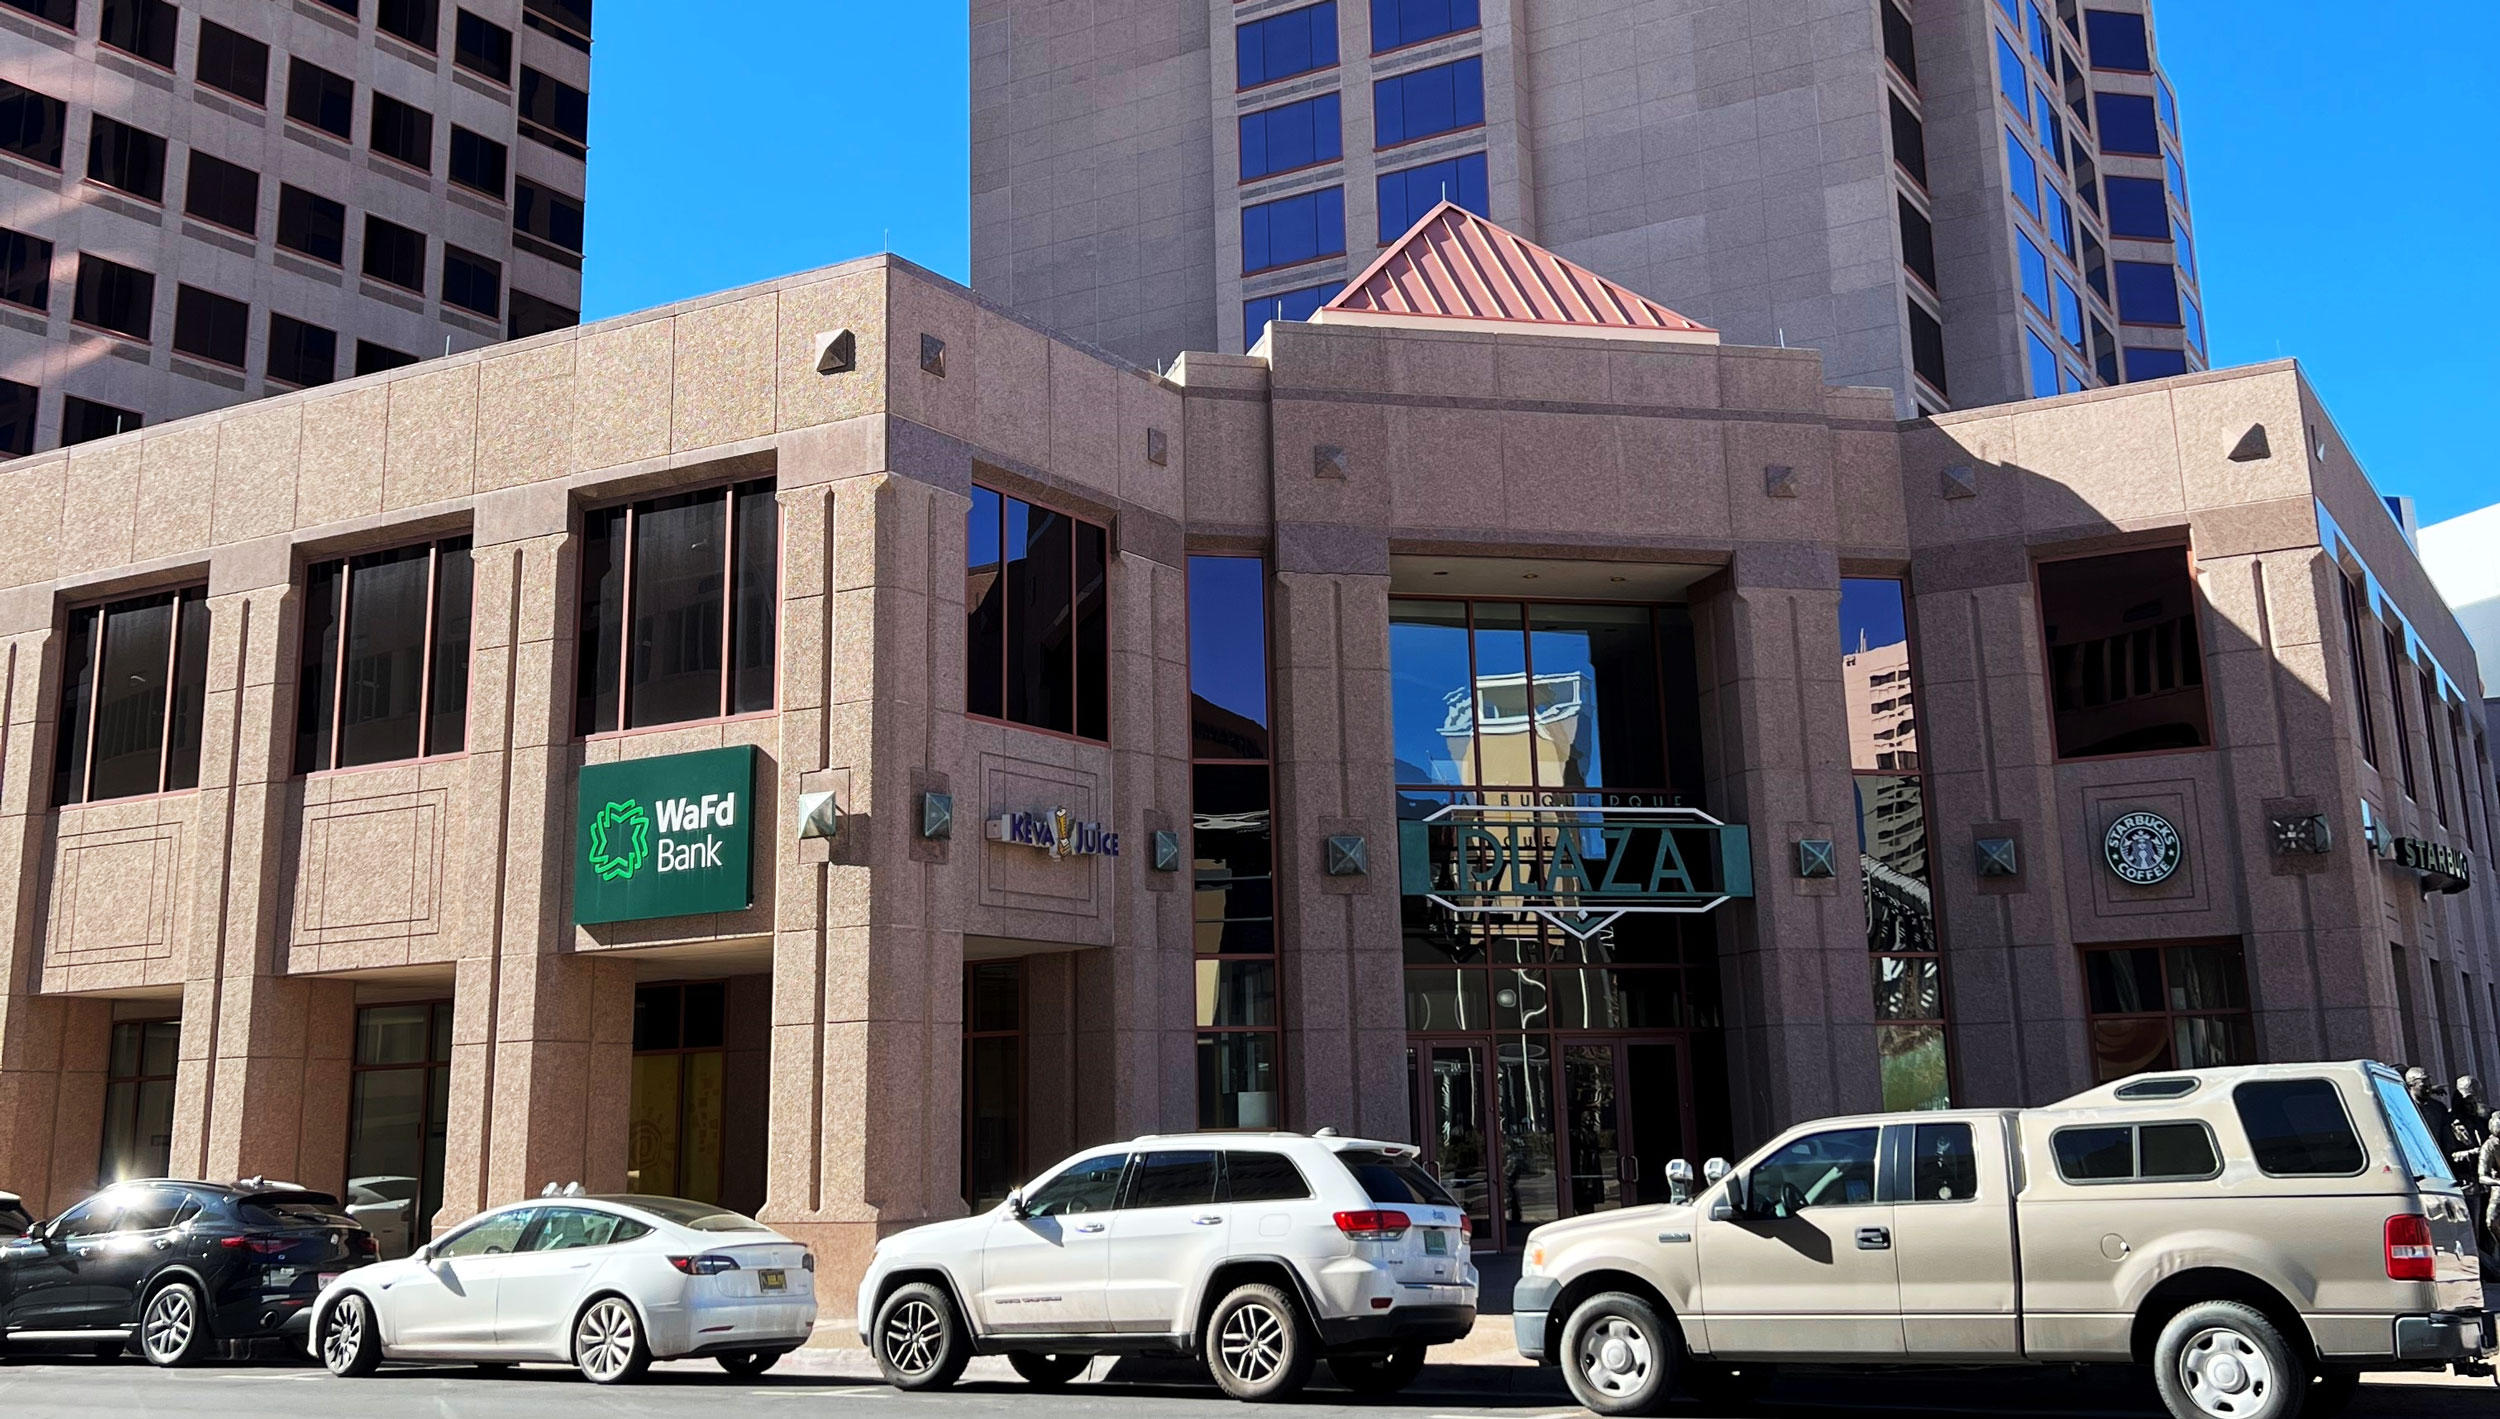 Photo of the WaFd Bank Branch location in Albuquerque, New Mexico. Located at 201 3rd Street NW Suite E, Albuquerque, NM 87102.